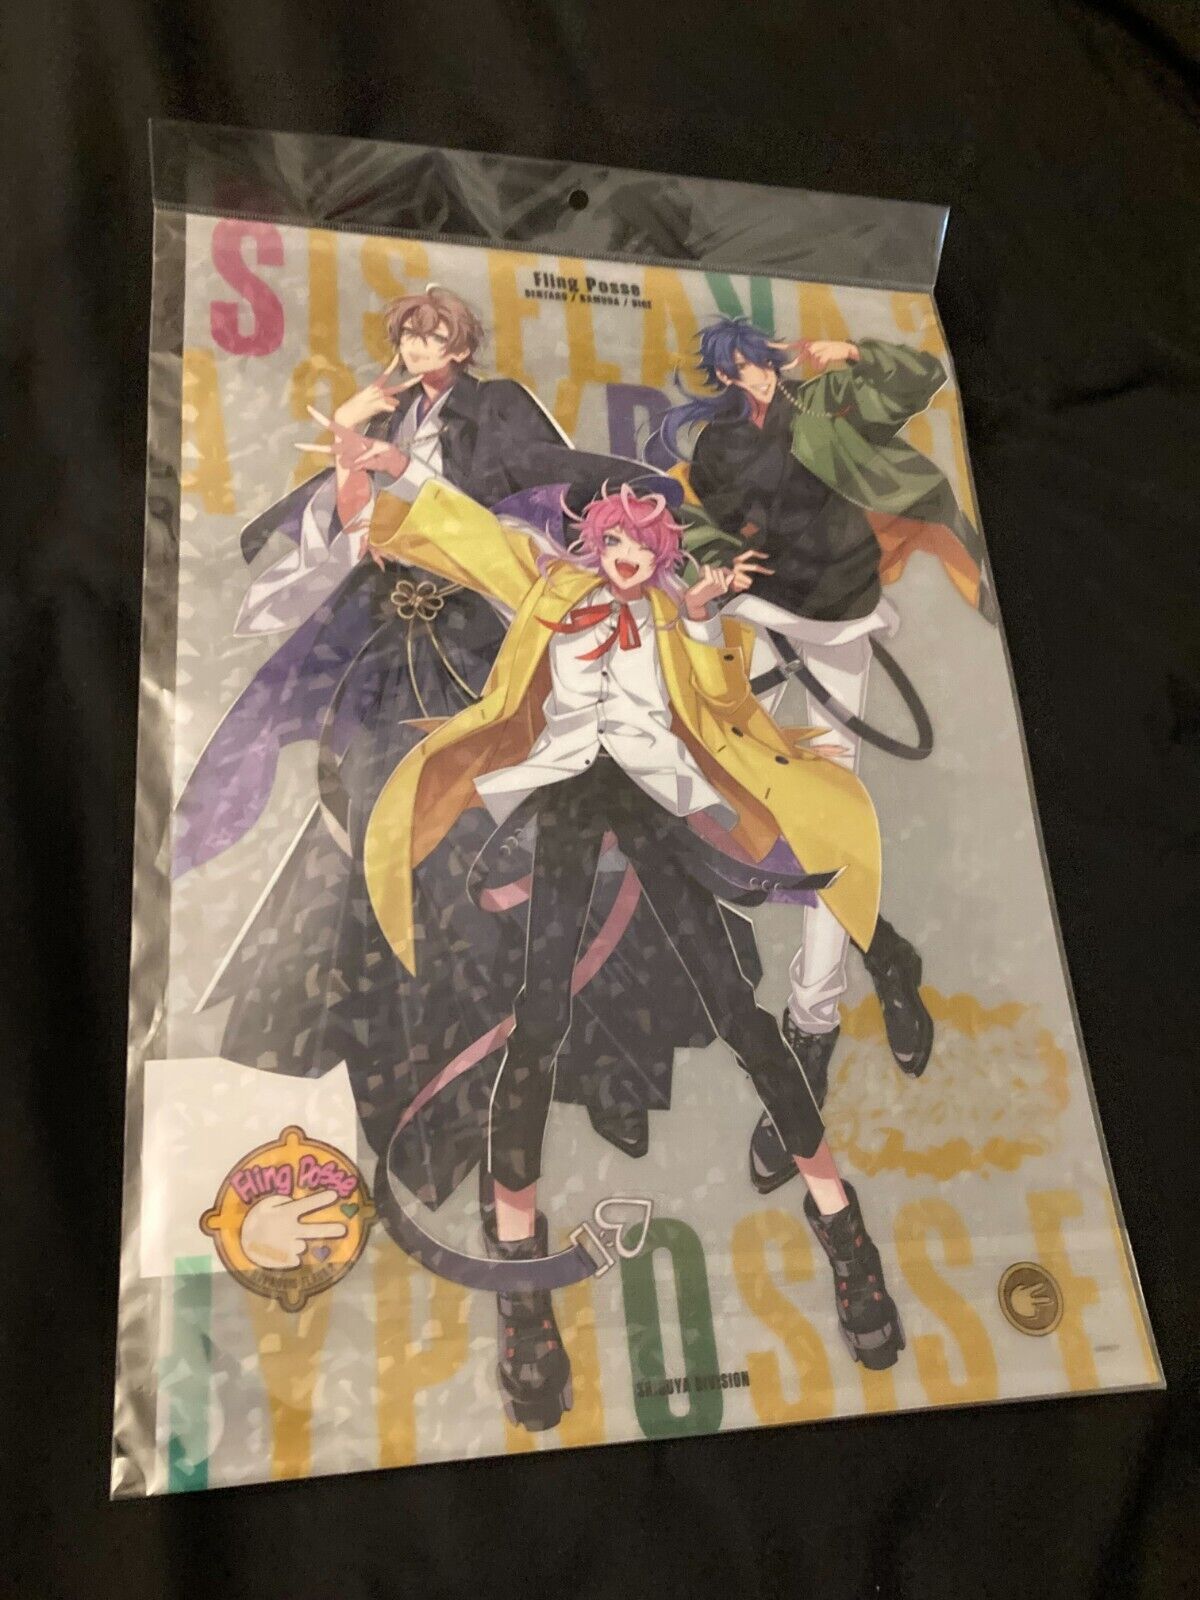 Official Hypnosis Mic Fling Posse Clear Poster A3 Hypnosis Mic Flava 2 Ver. New